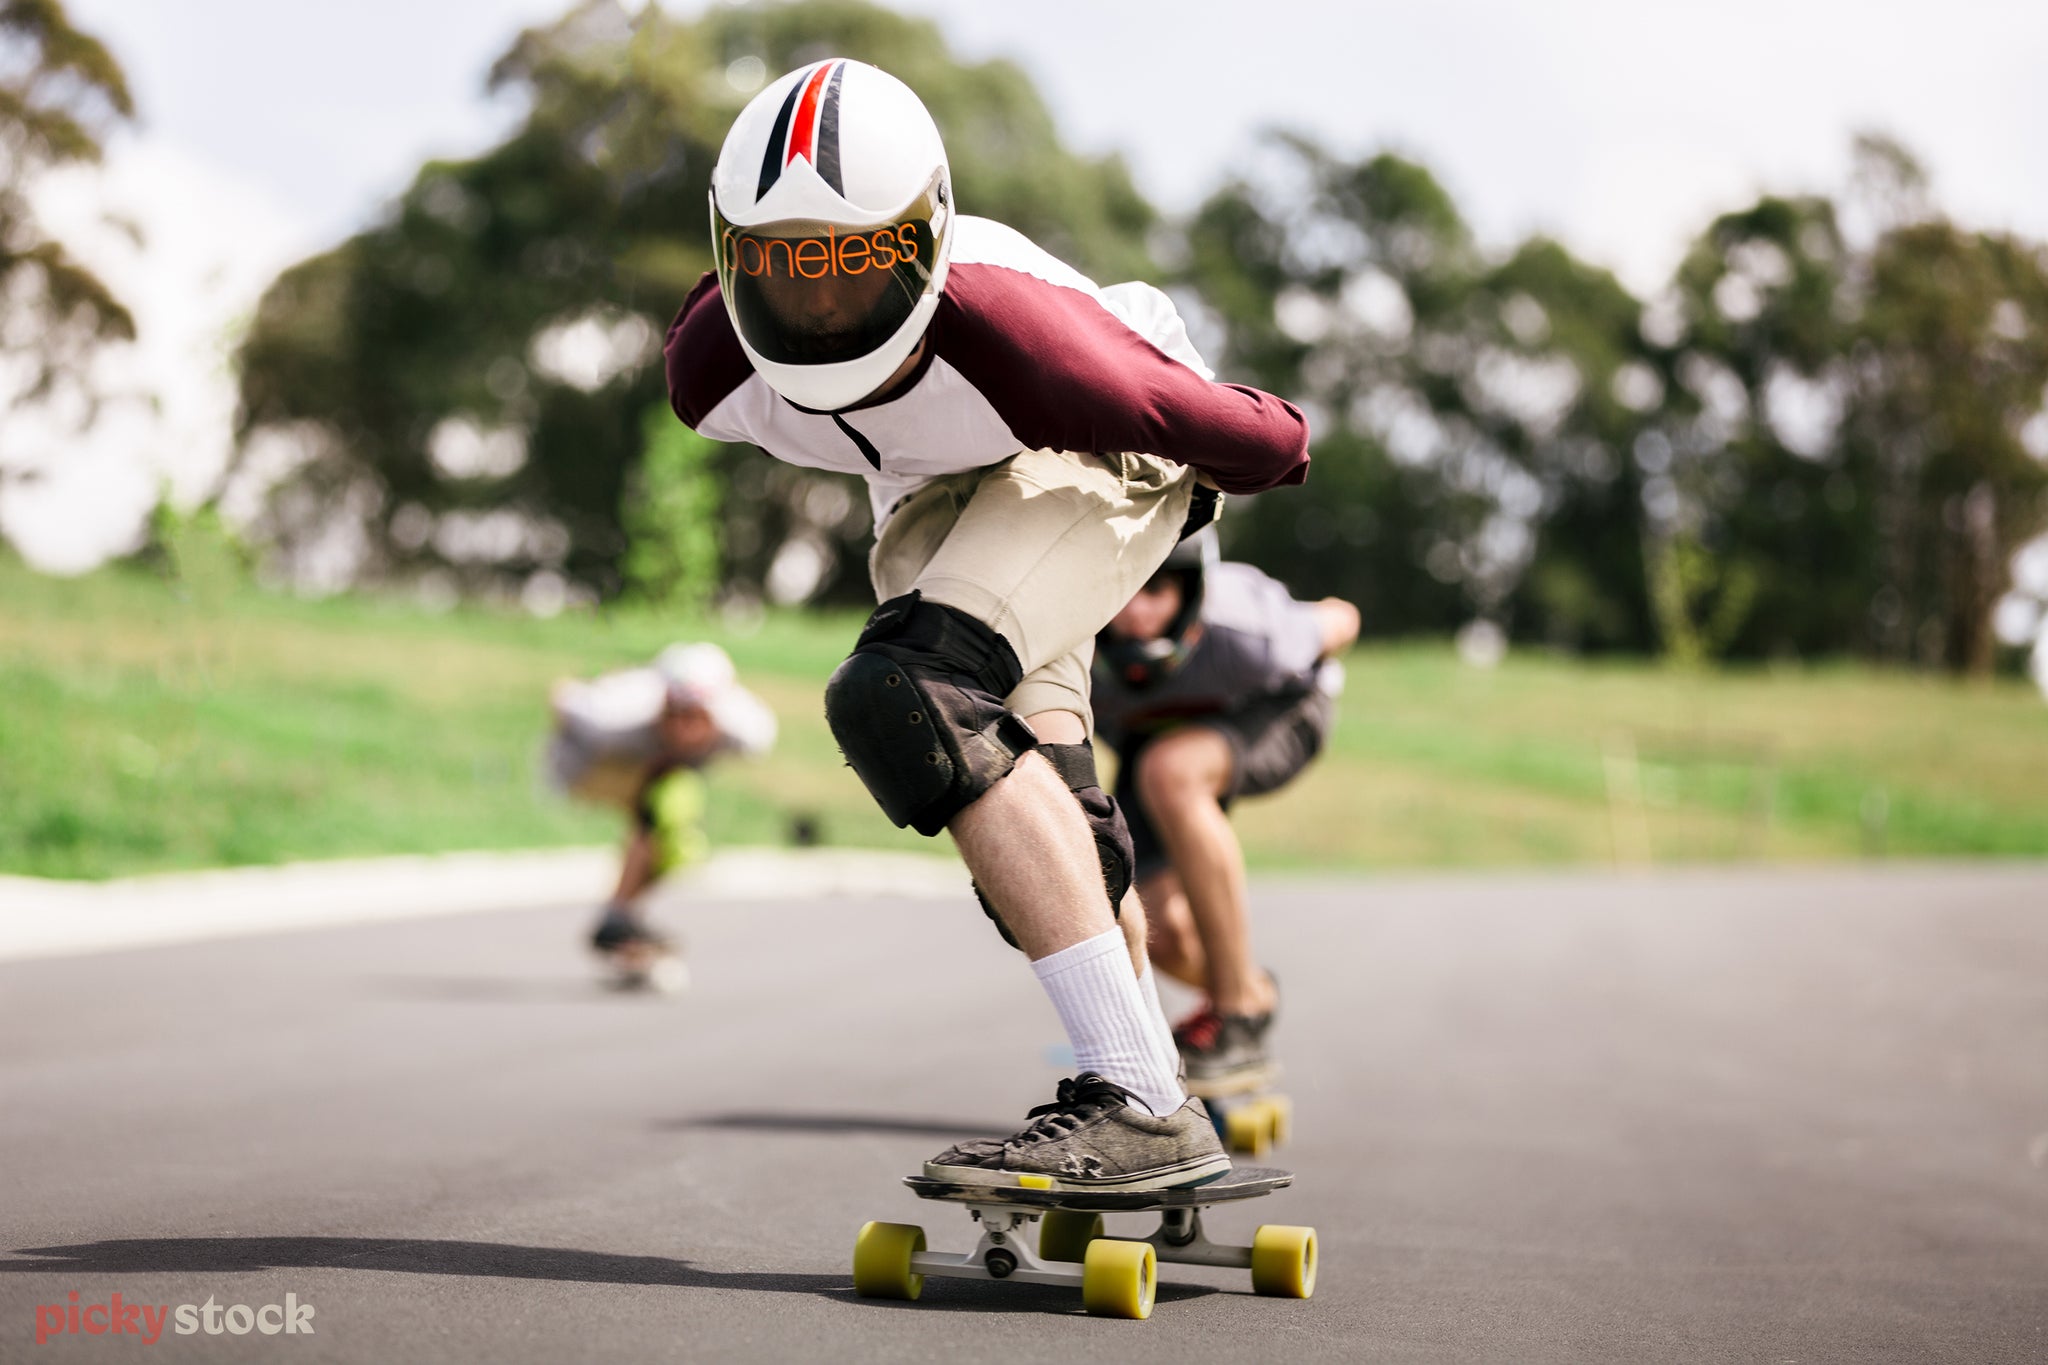 Landscape close-up of a group of longboarders speeding down a slope, the foremost is in black safety pads on their knees and a large white helmet with ‘boneless’ written across the visor.